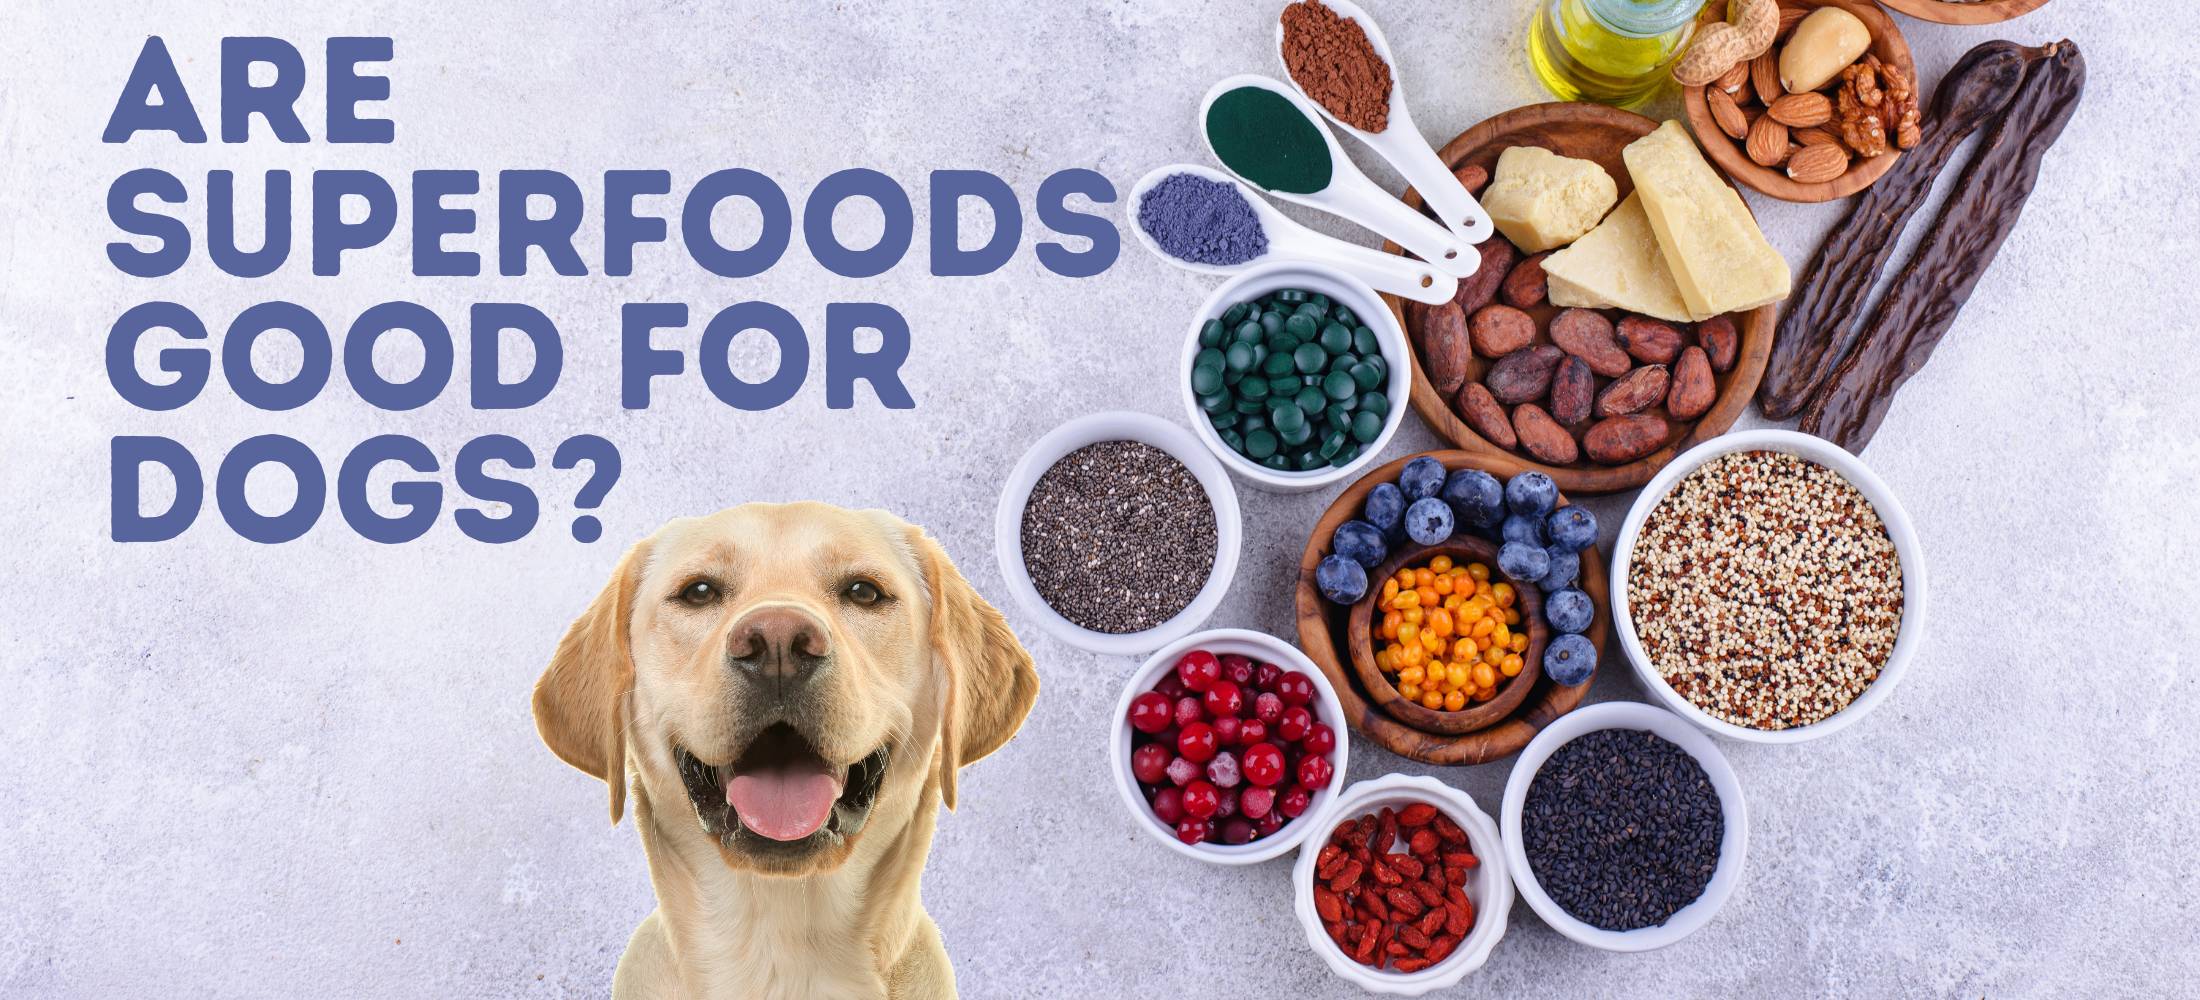 A golden lab sits next to a plethora of superfoods for dogs